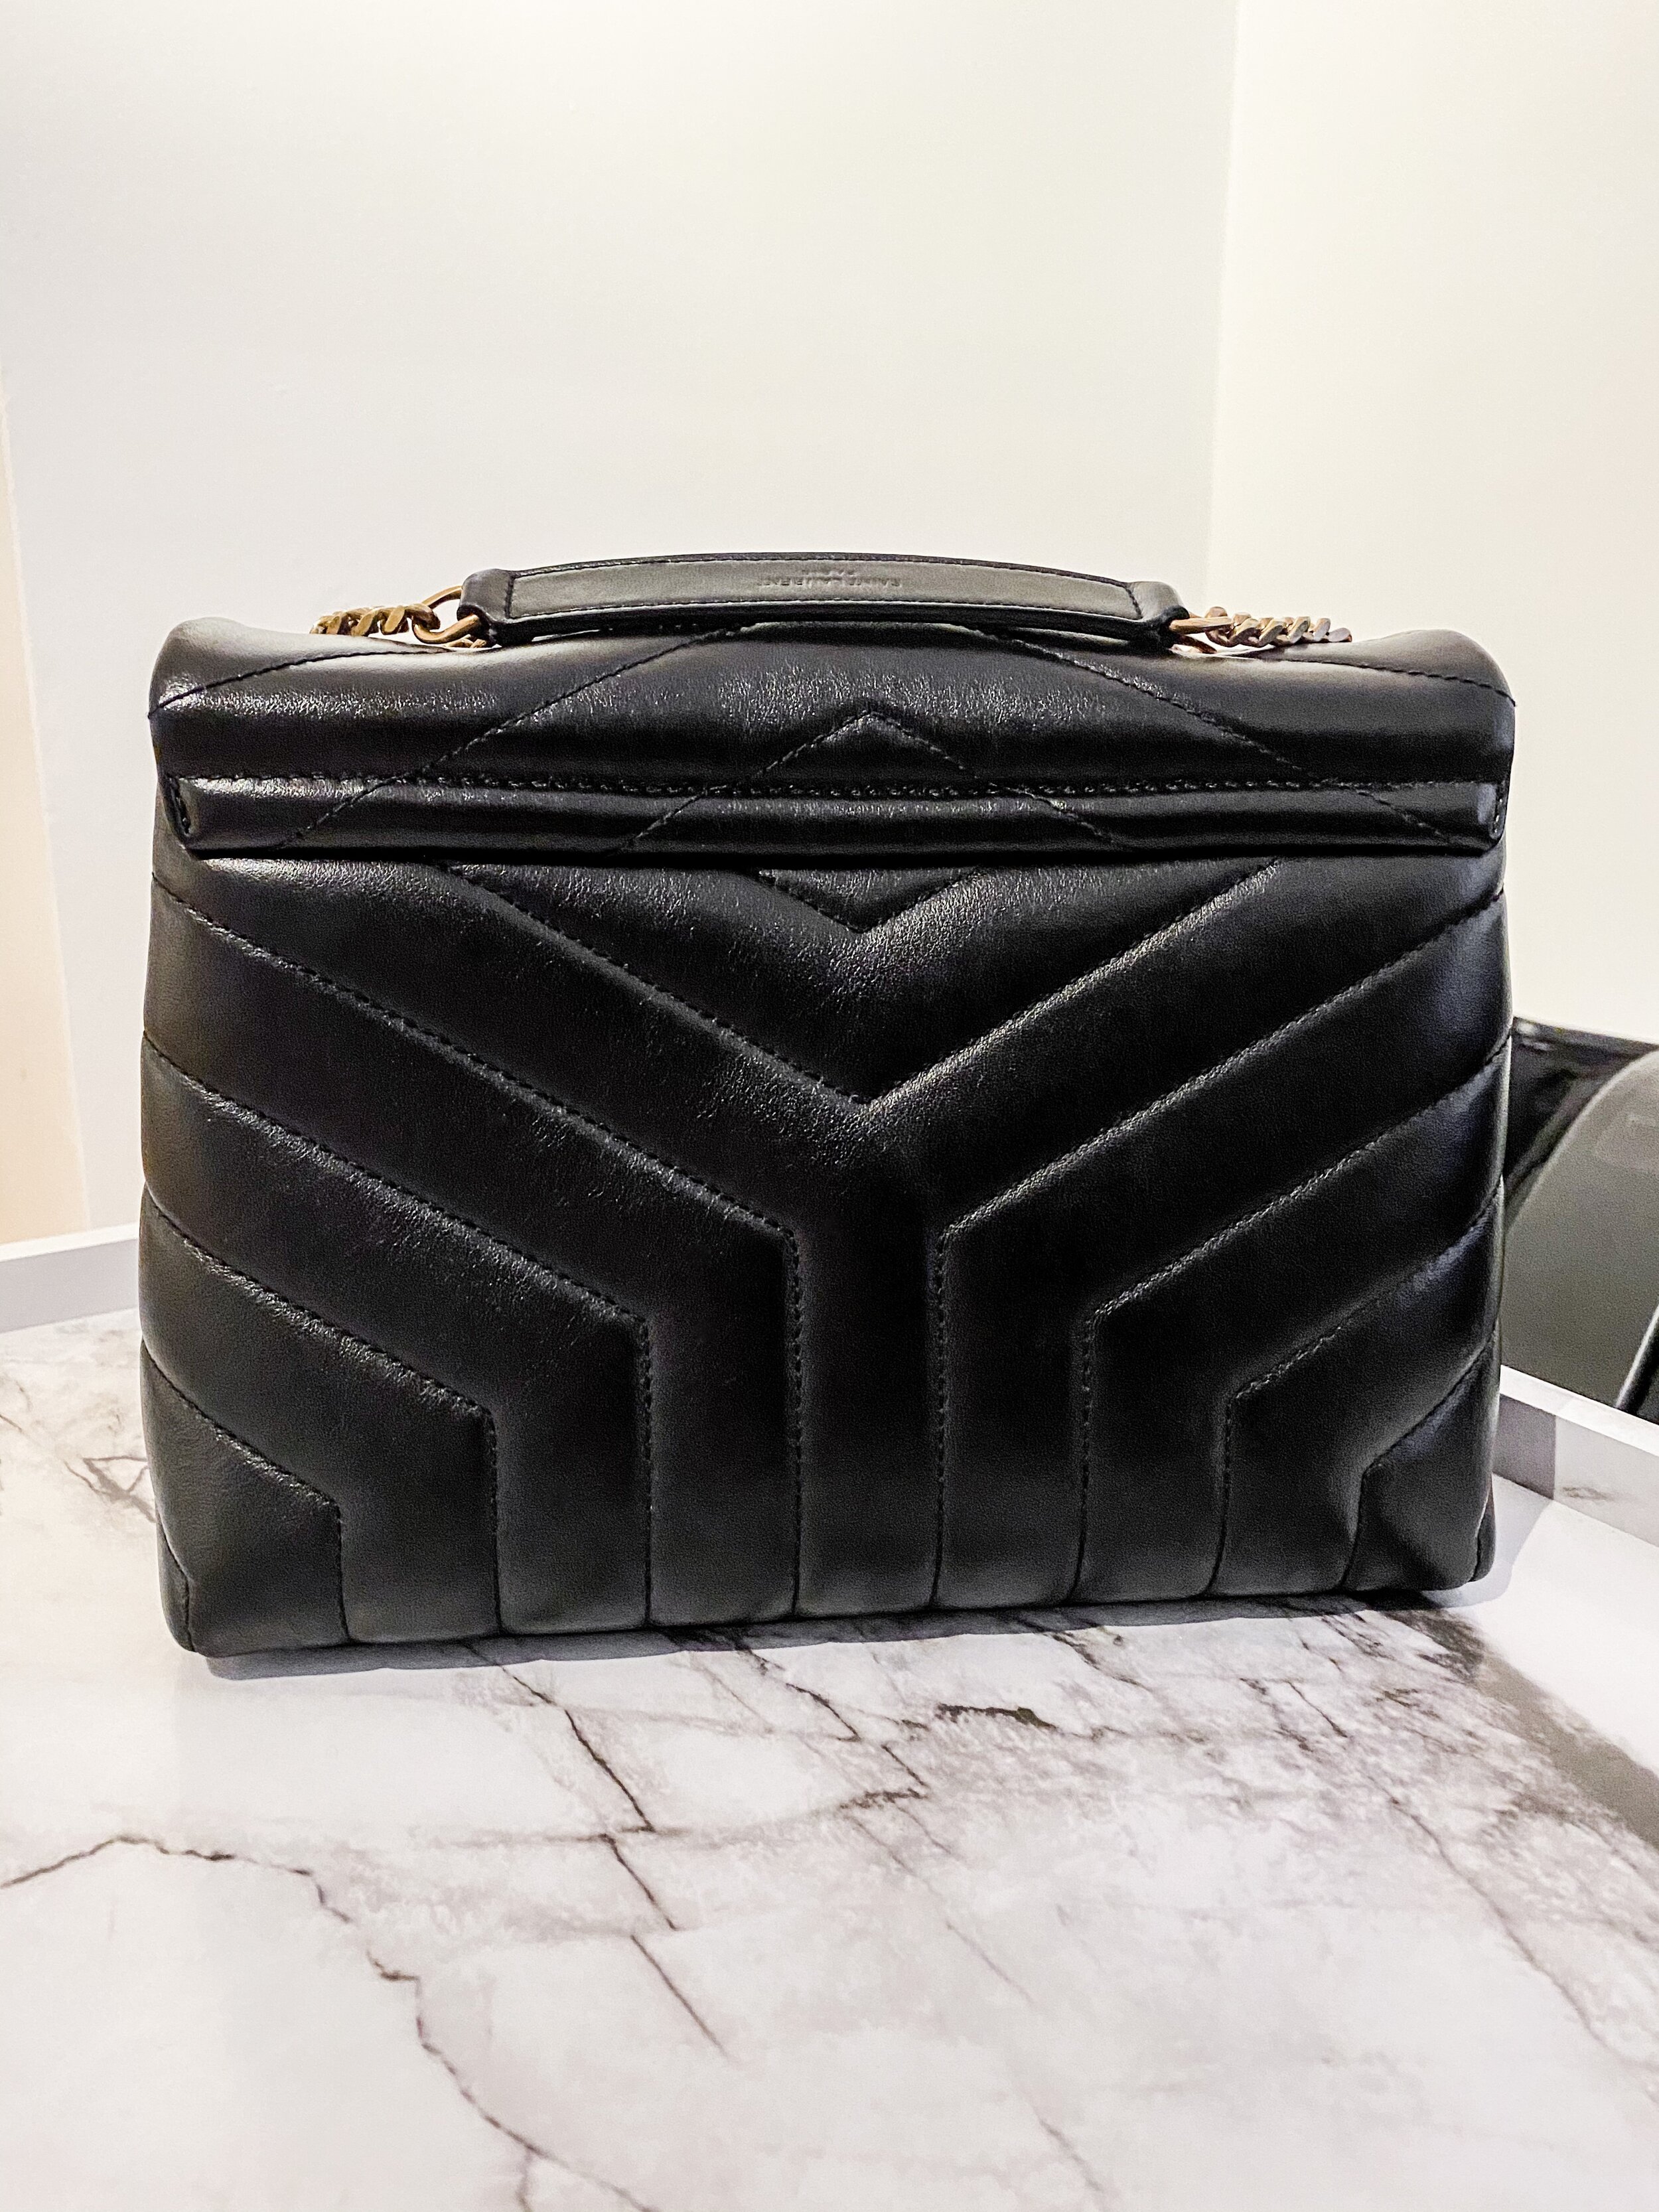 YSL SAINT LAURENT Mini Loulou Toy Bag: Review, Wear and Tear, What